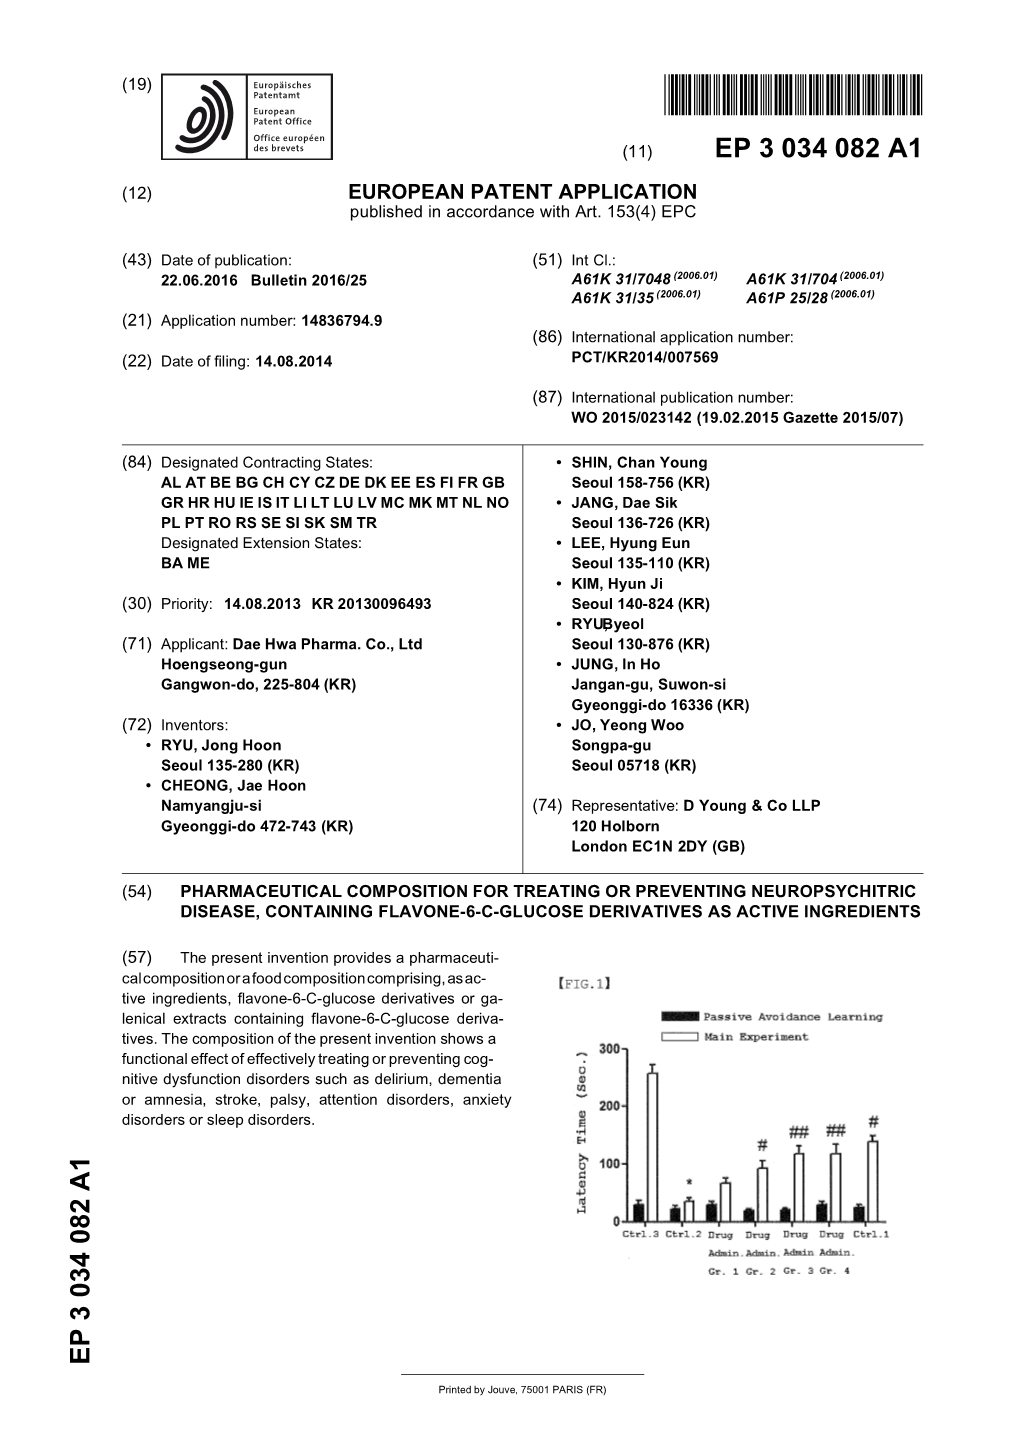 Pharmaceutical Composition for Treating Or Preventing Neuropsychitric Disease, Containing Flavone-6-C-Glucose Derivatives As Active Ingredients